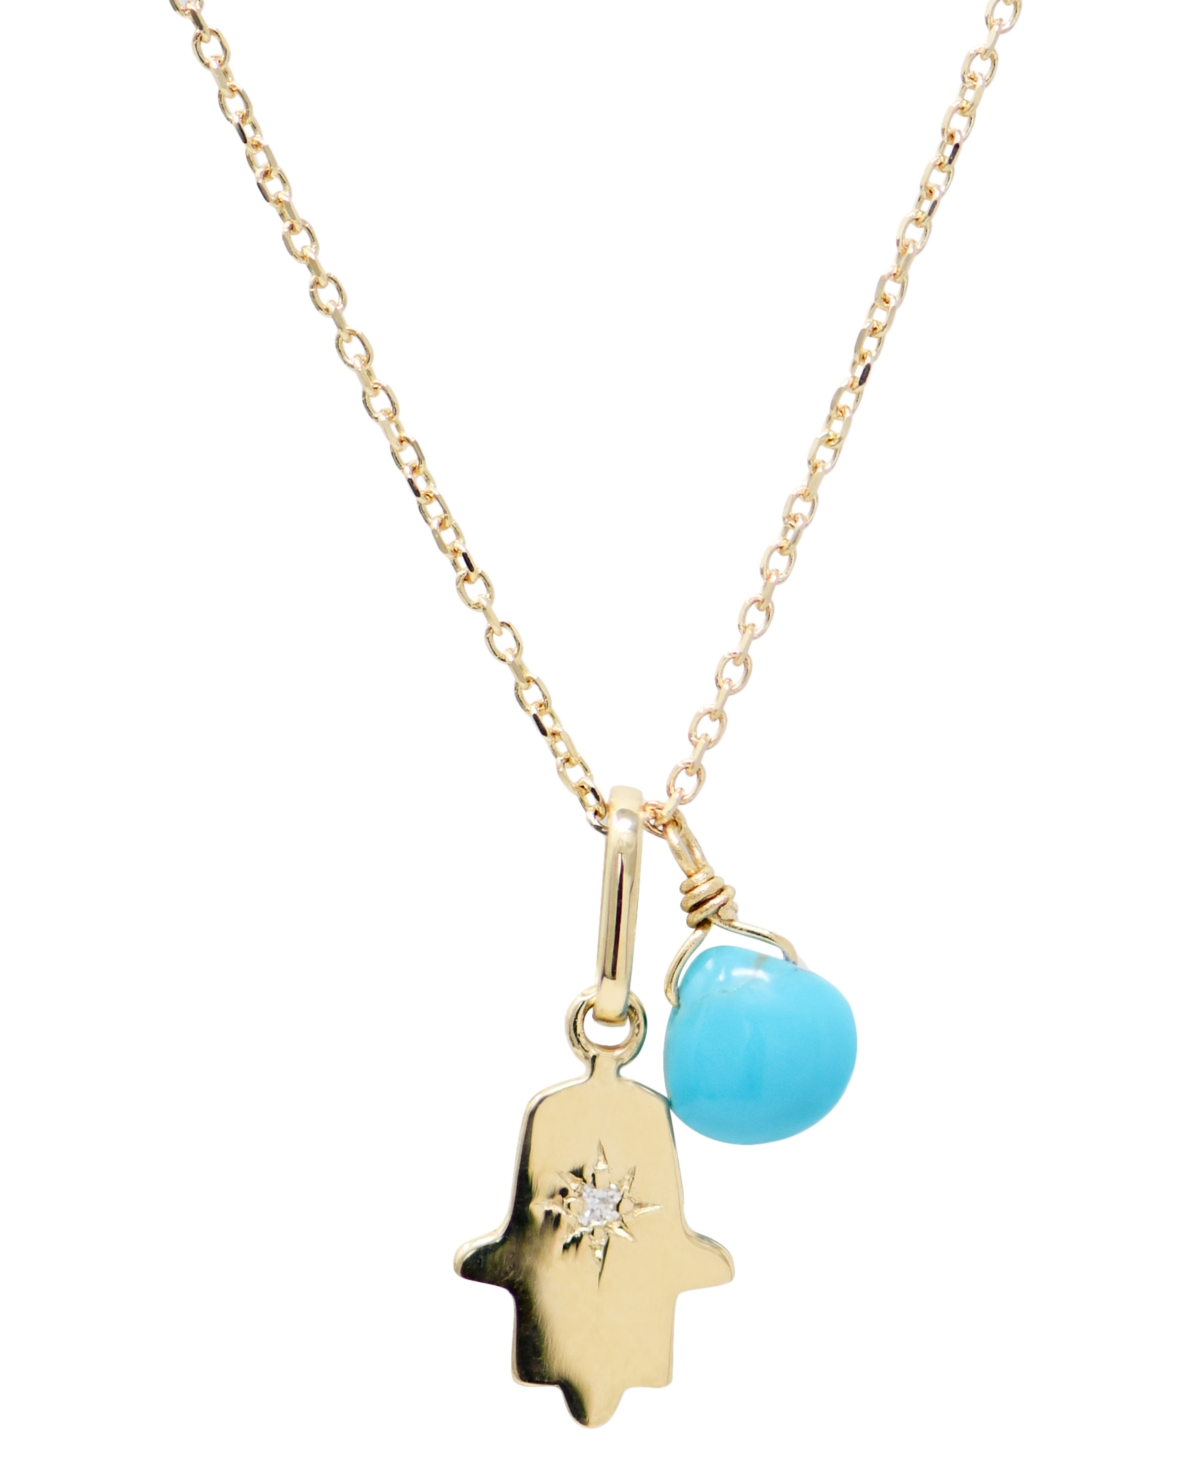 Diamond Accent & Sleeping Beauty Turquoise Hamsa Hand Two Charm Pendant Necklace in 14k Gold, 16" + 1" extender - Gold